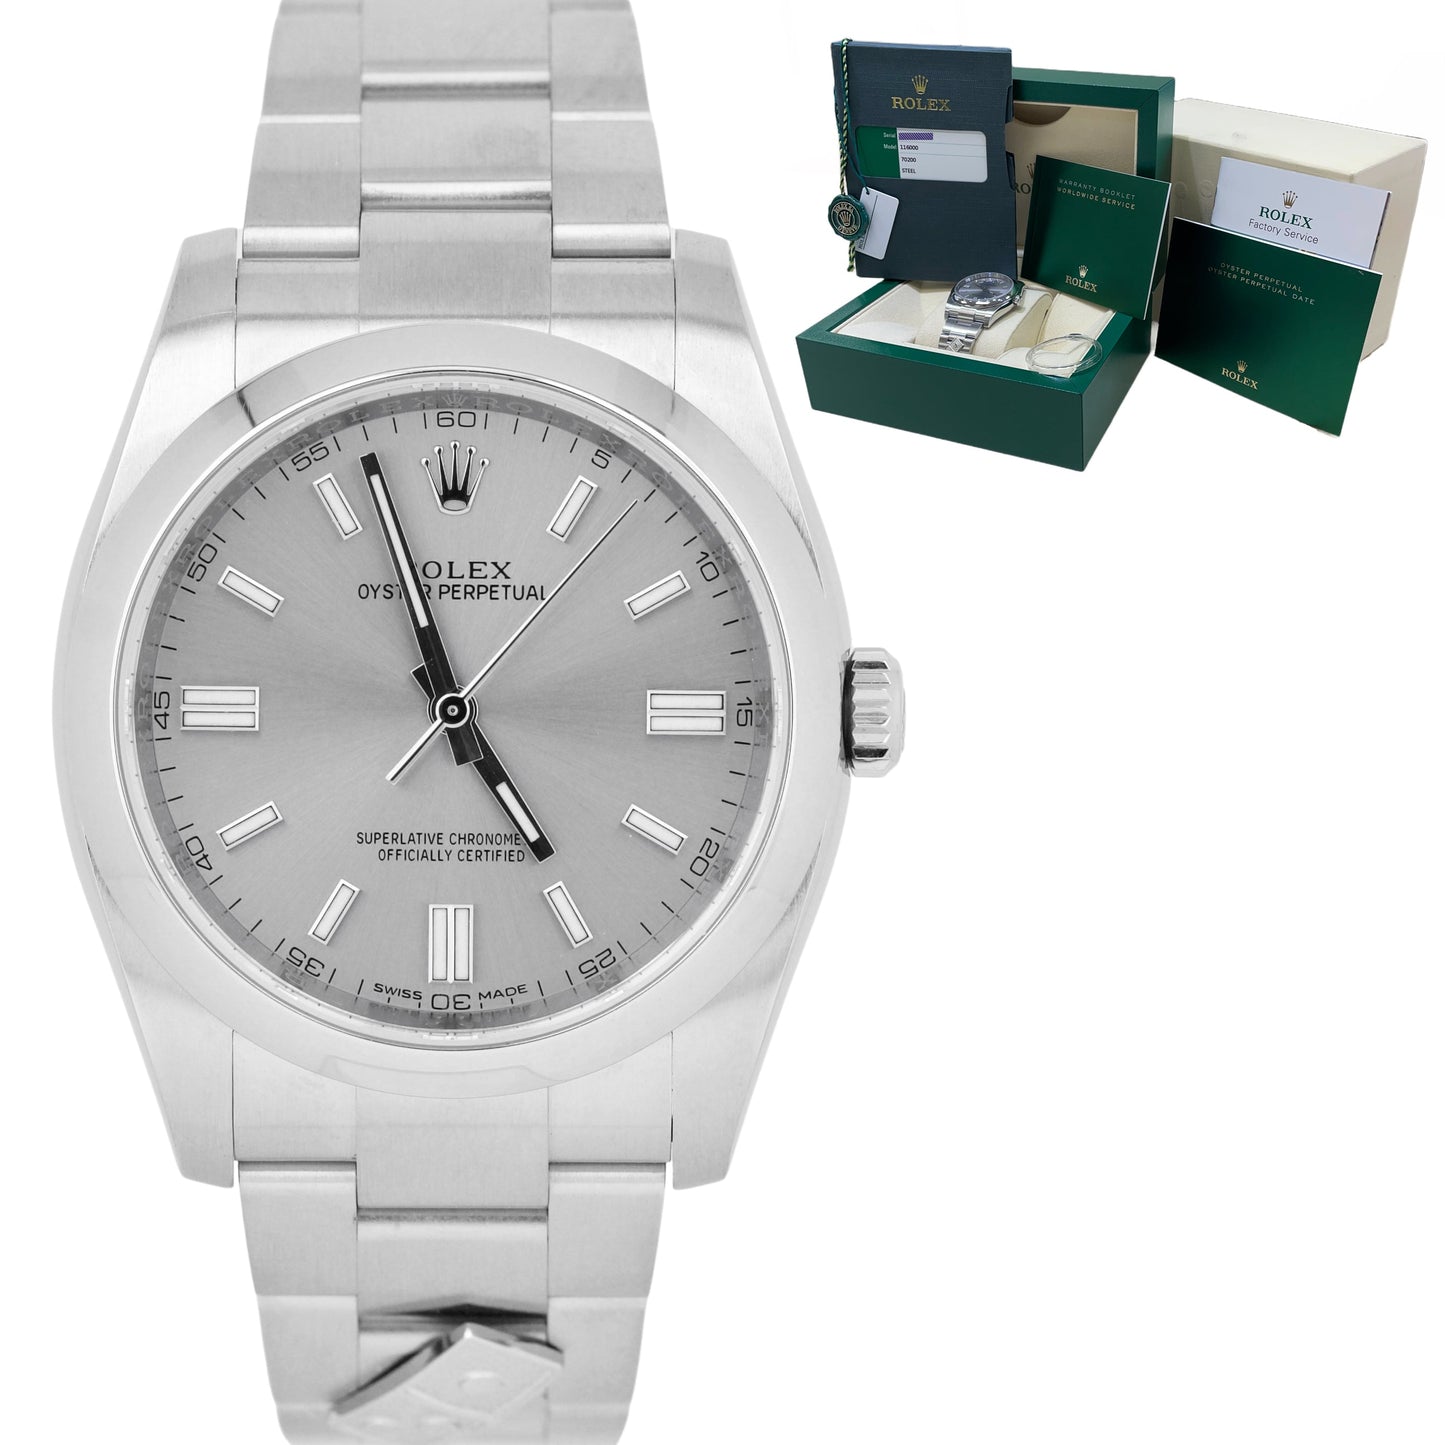 MINT Rolex Oyster Perpetual 36mm Stainless Steel Silver Domino Watch 116000 B&P